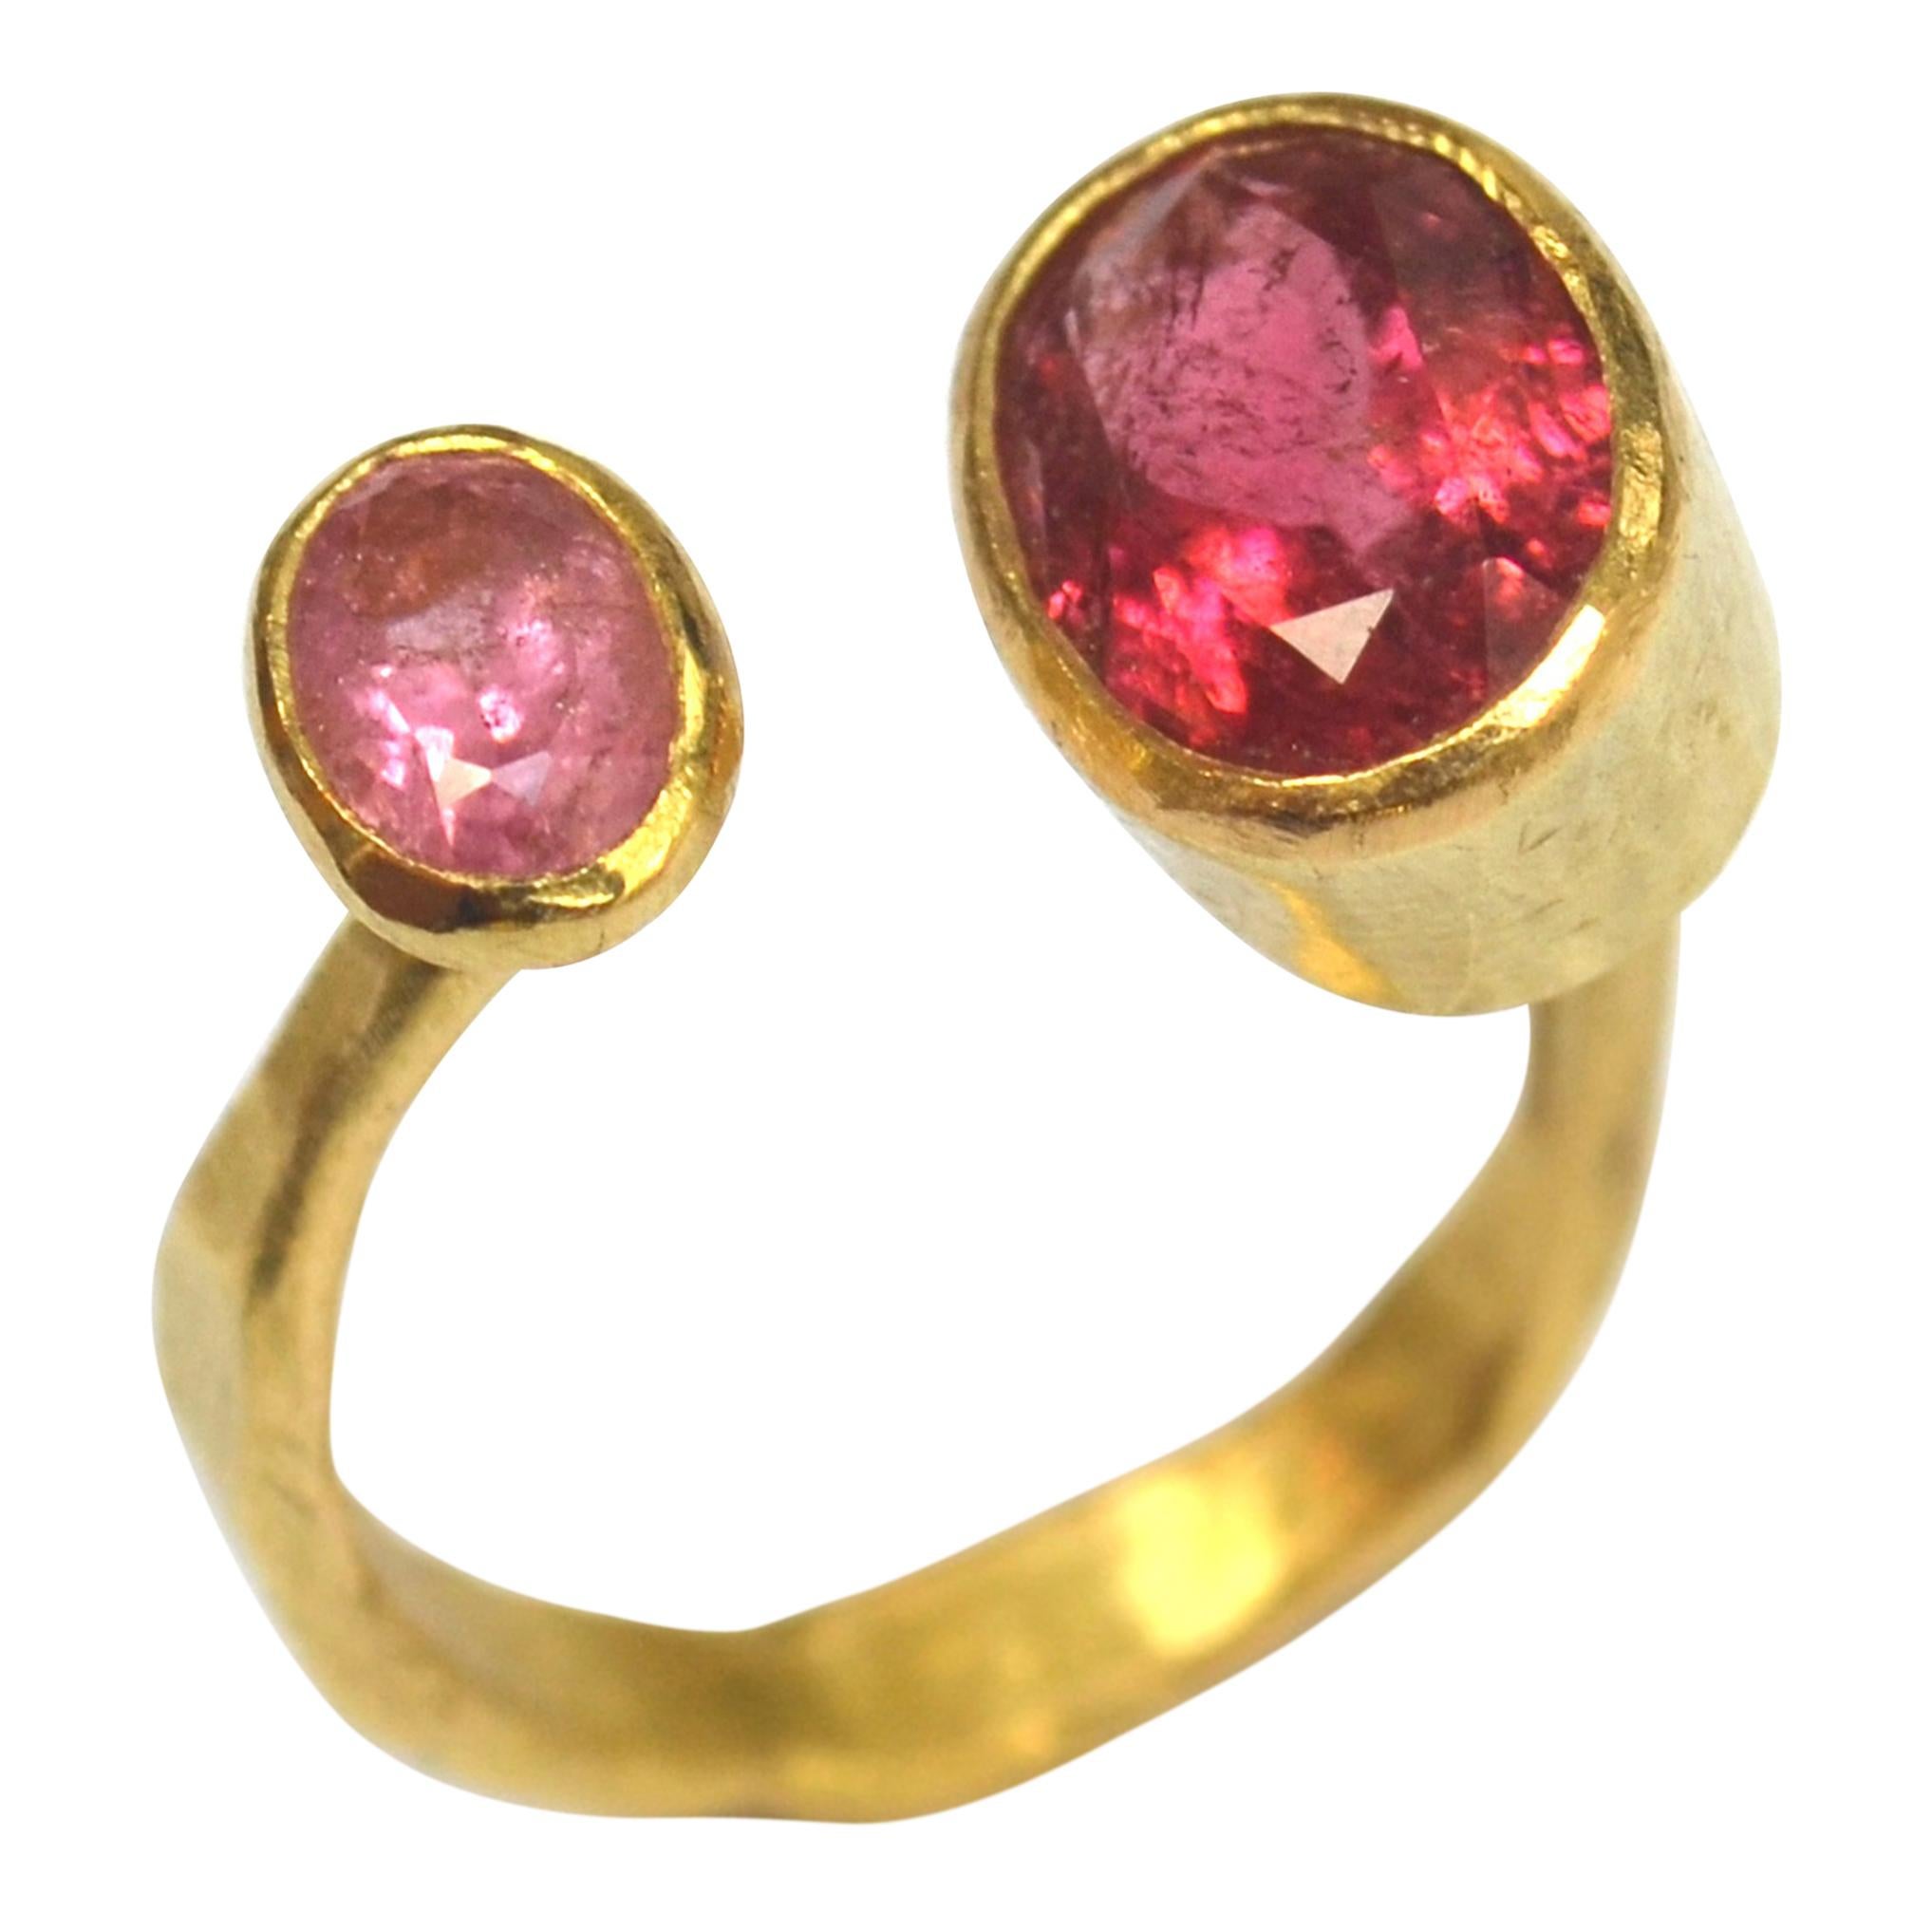 Contemporary Double Pink Tourmaline 18 Karat Gold Handmade Ring by Disa Allsopp For Sale